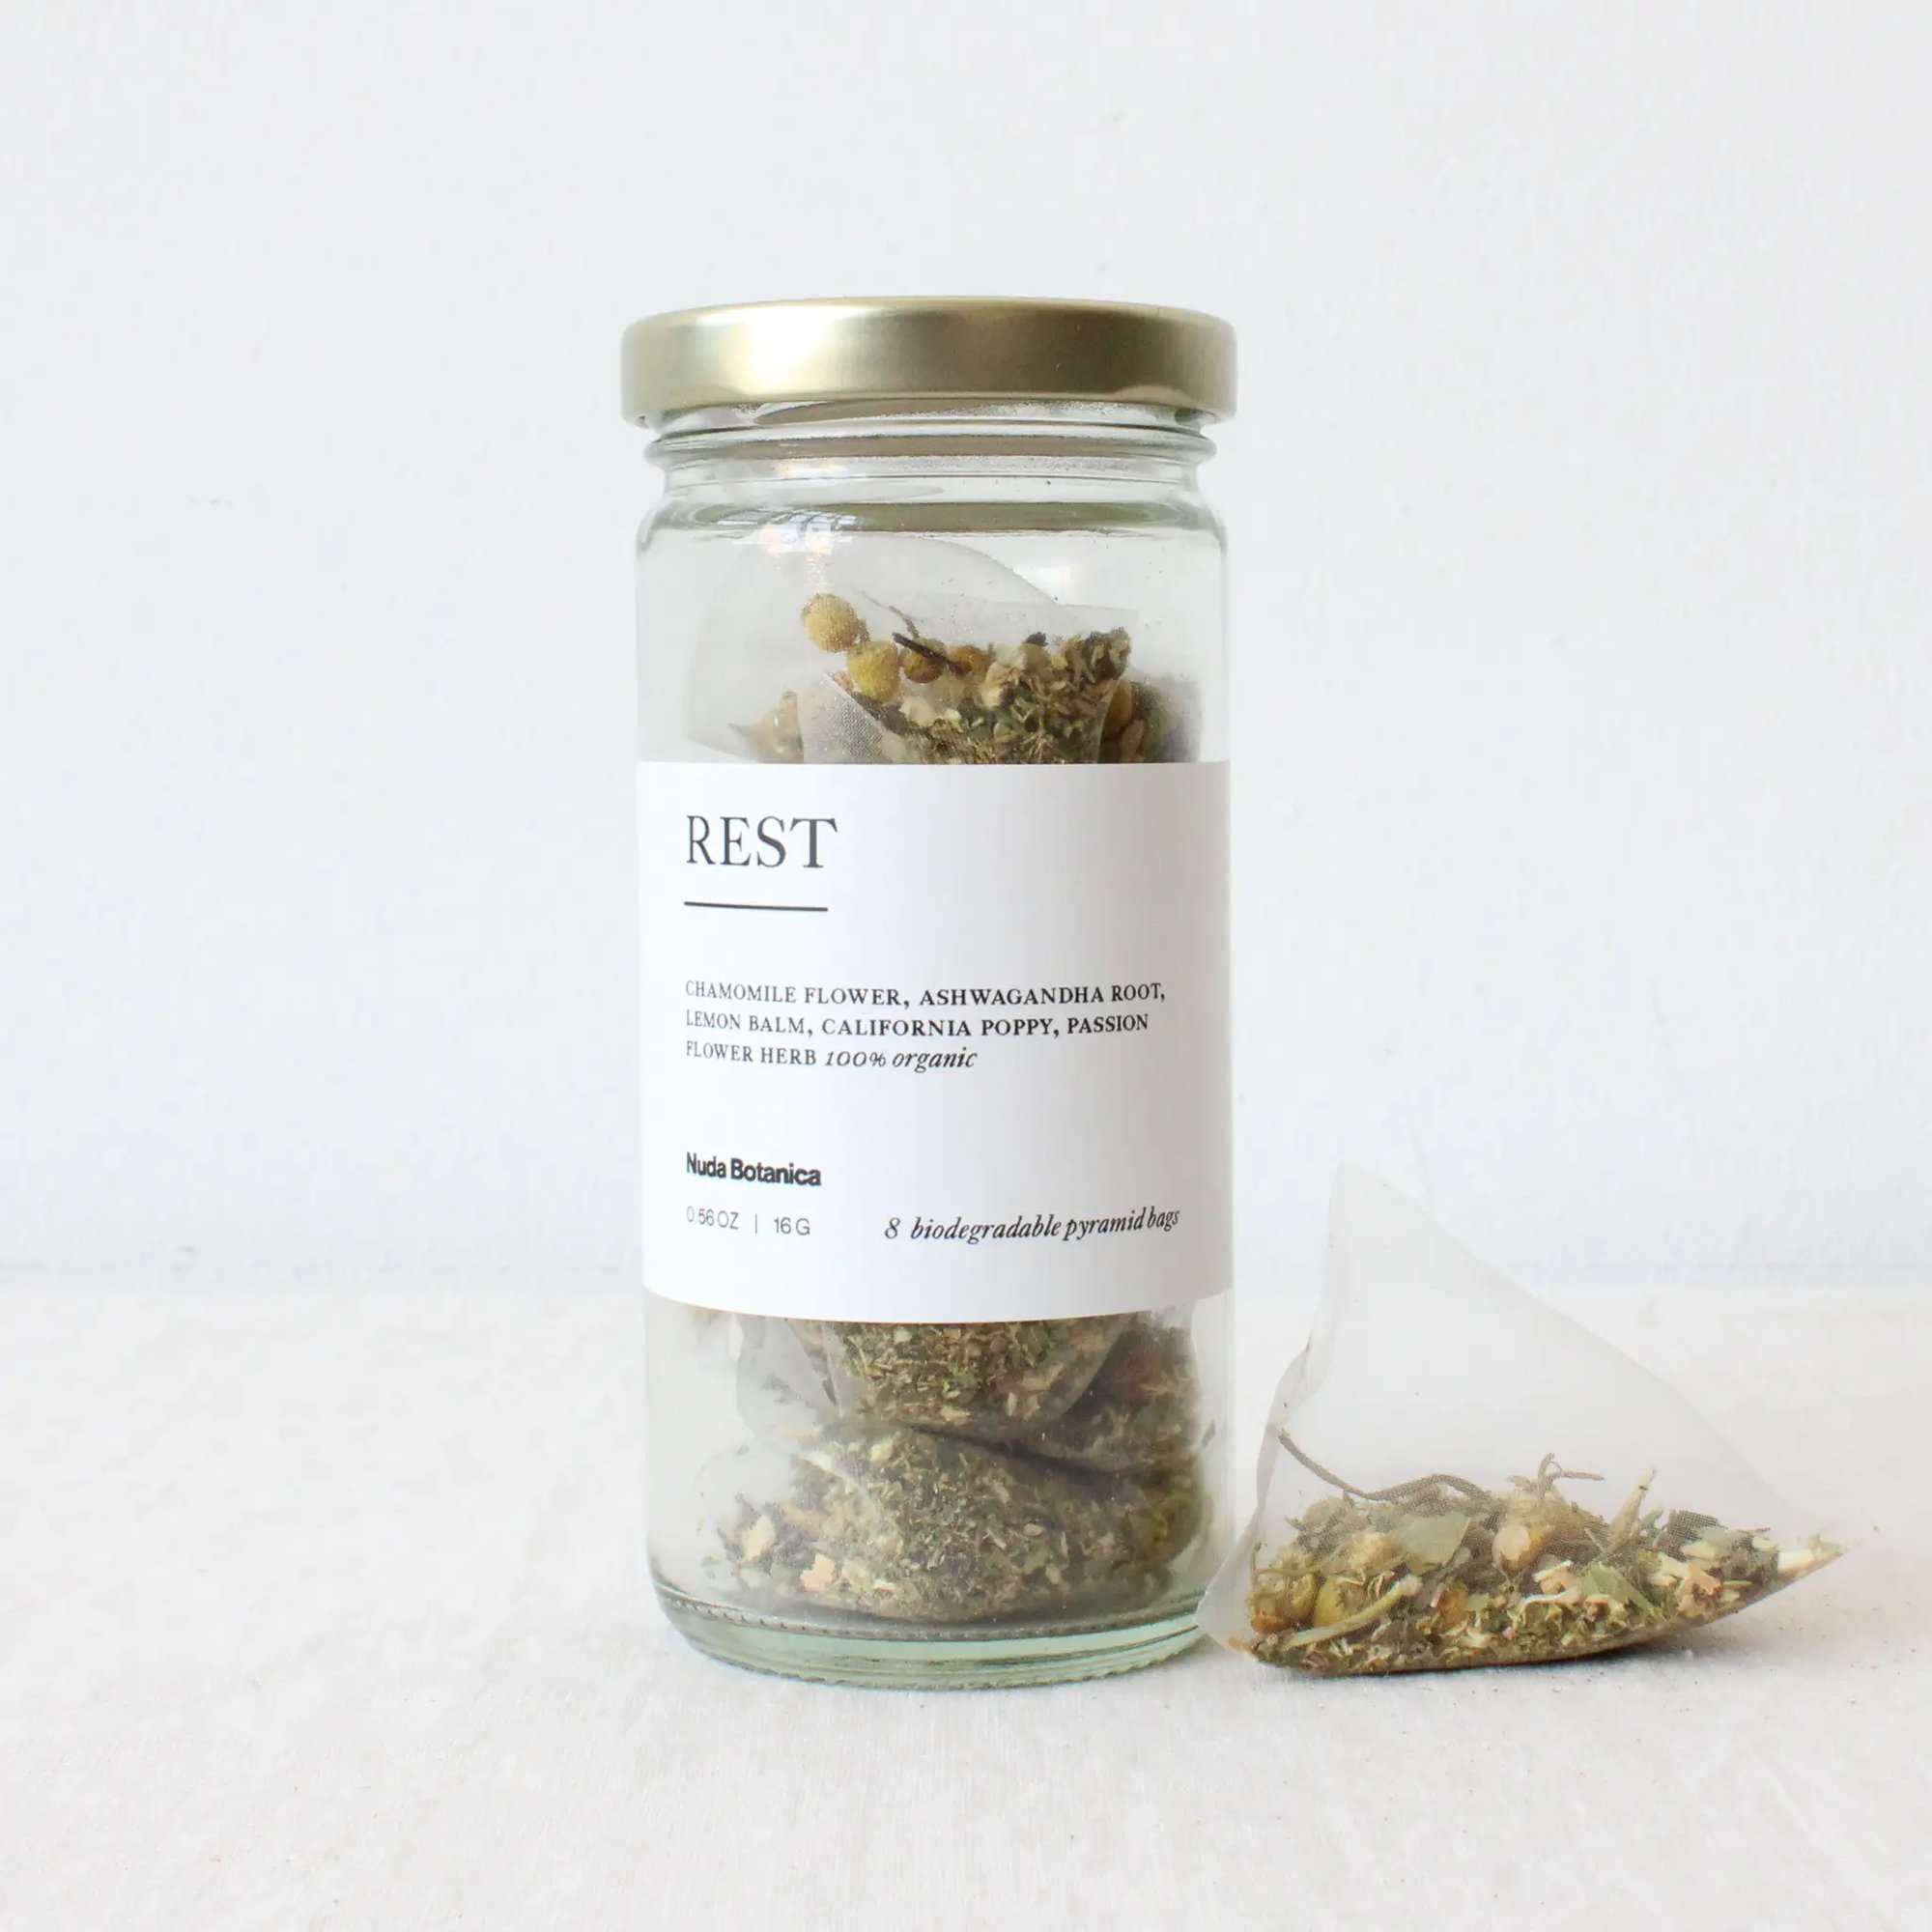 Image of "Time to Rest" Herbal Blend